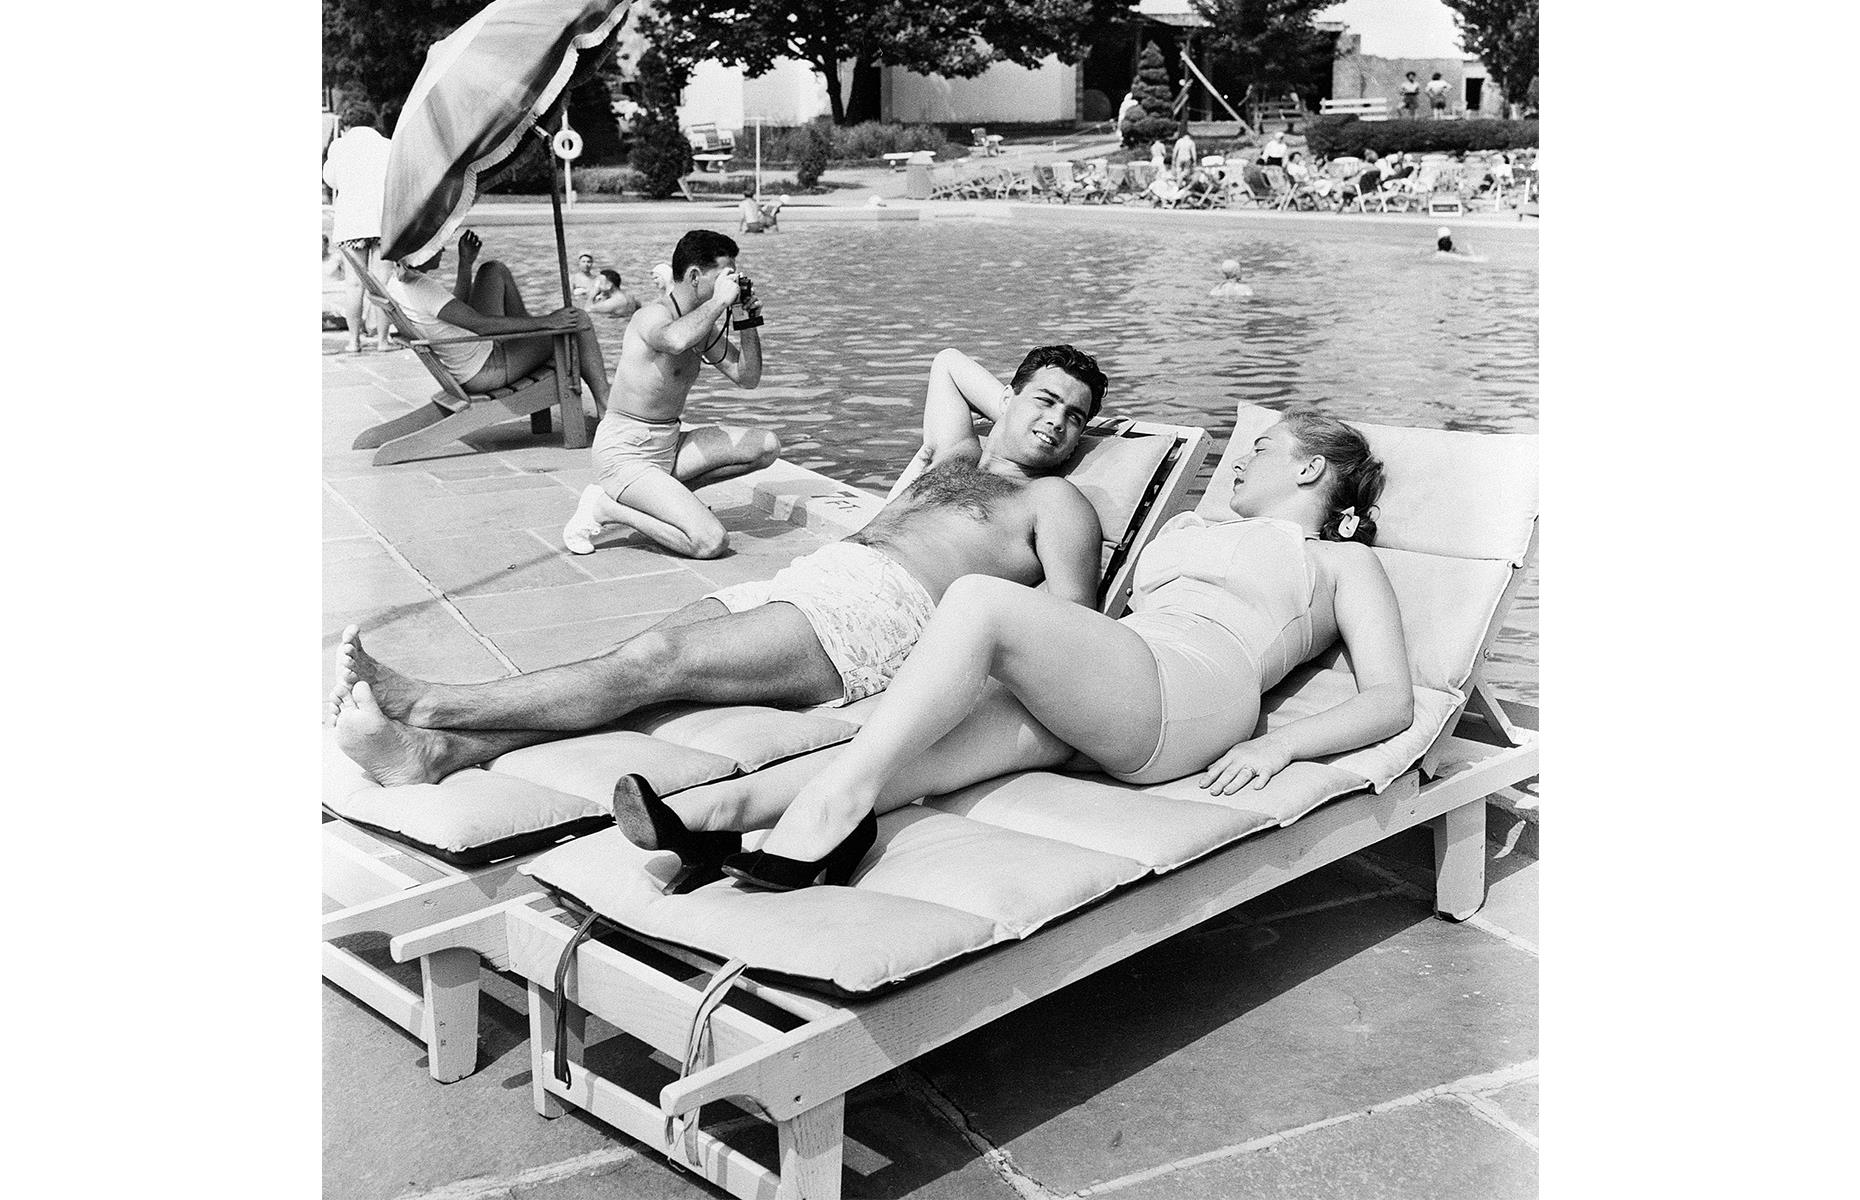 Farther up the state, the Catskill Mountains region proved popular with vacationers in the 1950s and beyond. Here a well-heeled couple relax by the pool in a swish resort in New York's Sullivan County in 1953. A man kneels to photograph his family in the pool beside them.